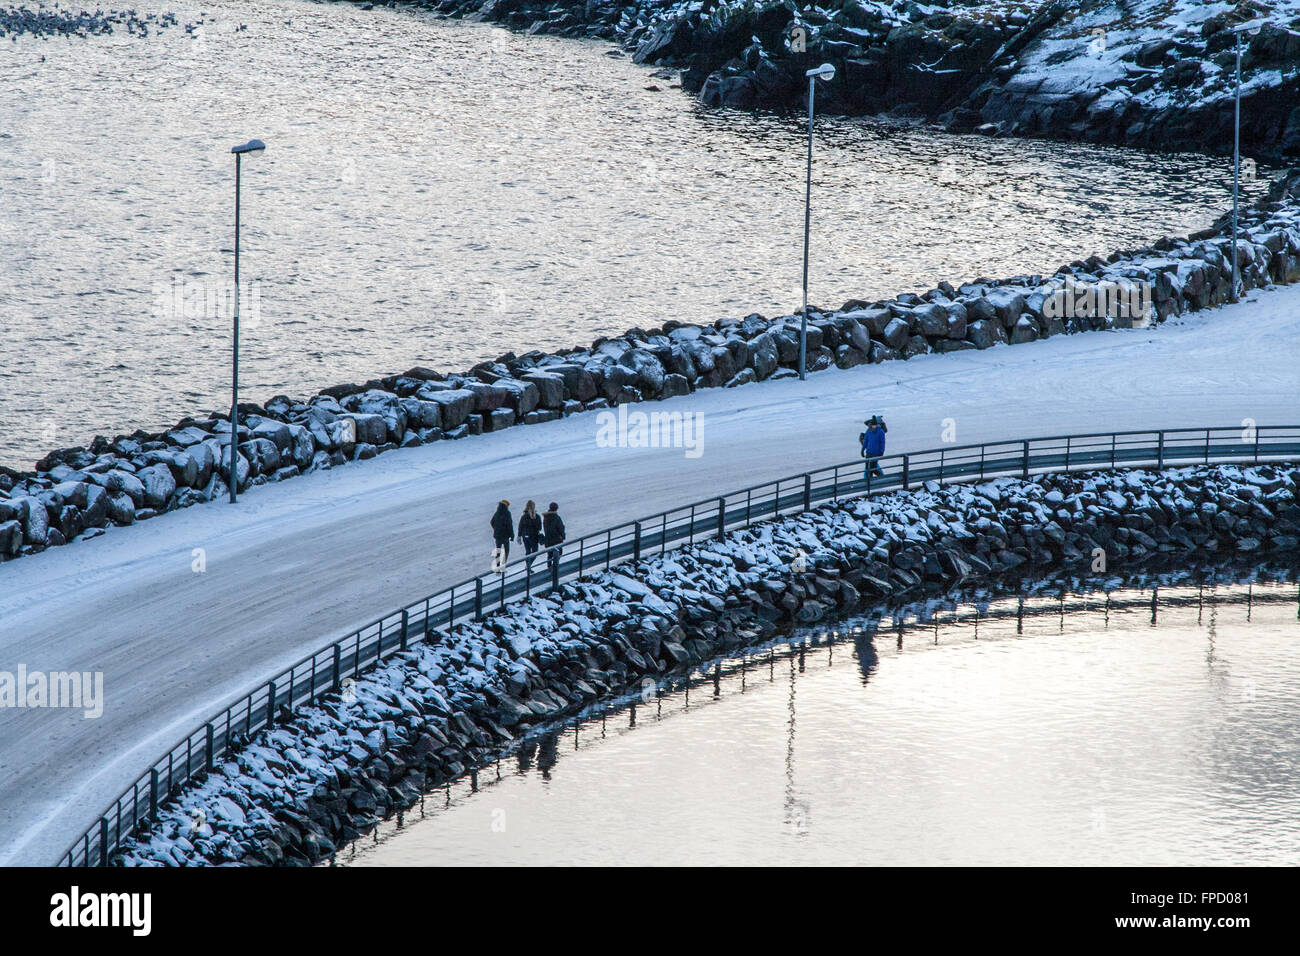 Three girls and a man with a rucksack walking towards eachother on an icy bridge in Stykkisholmur, Iceland Stock Photo